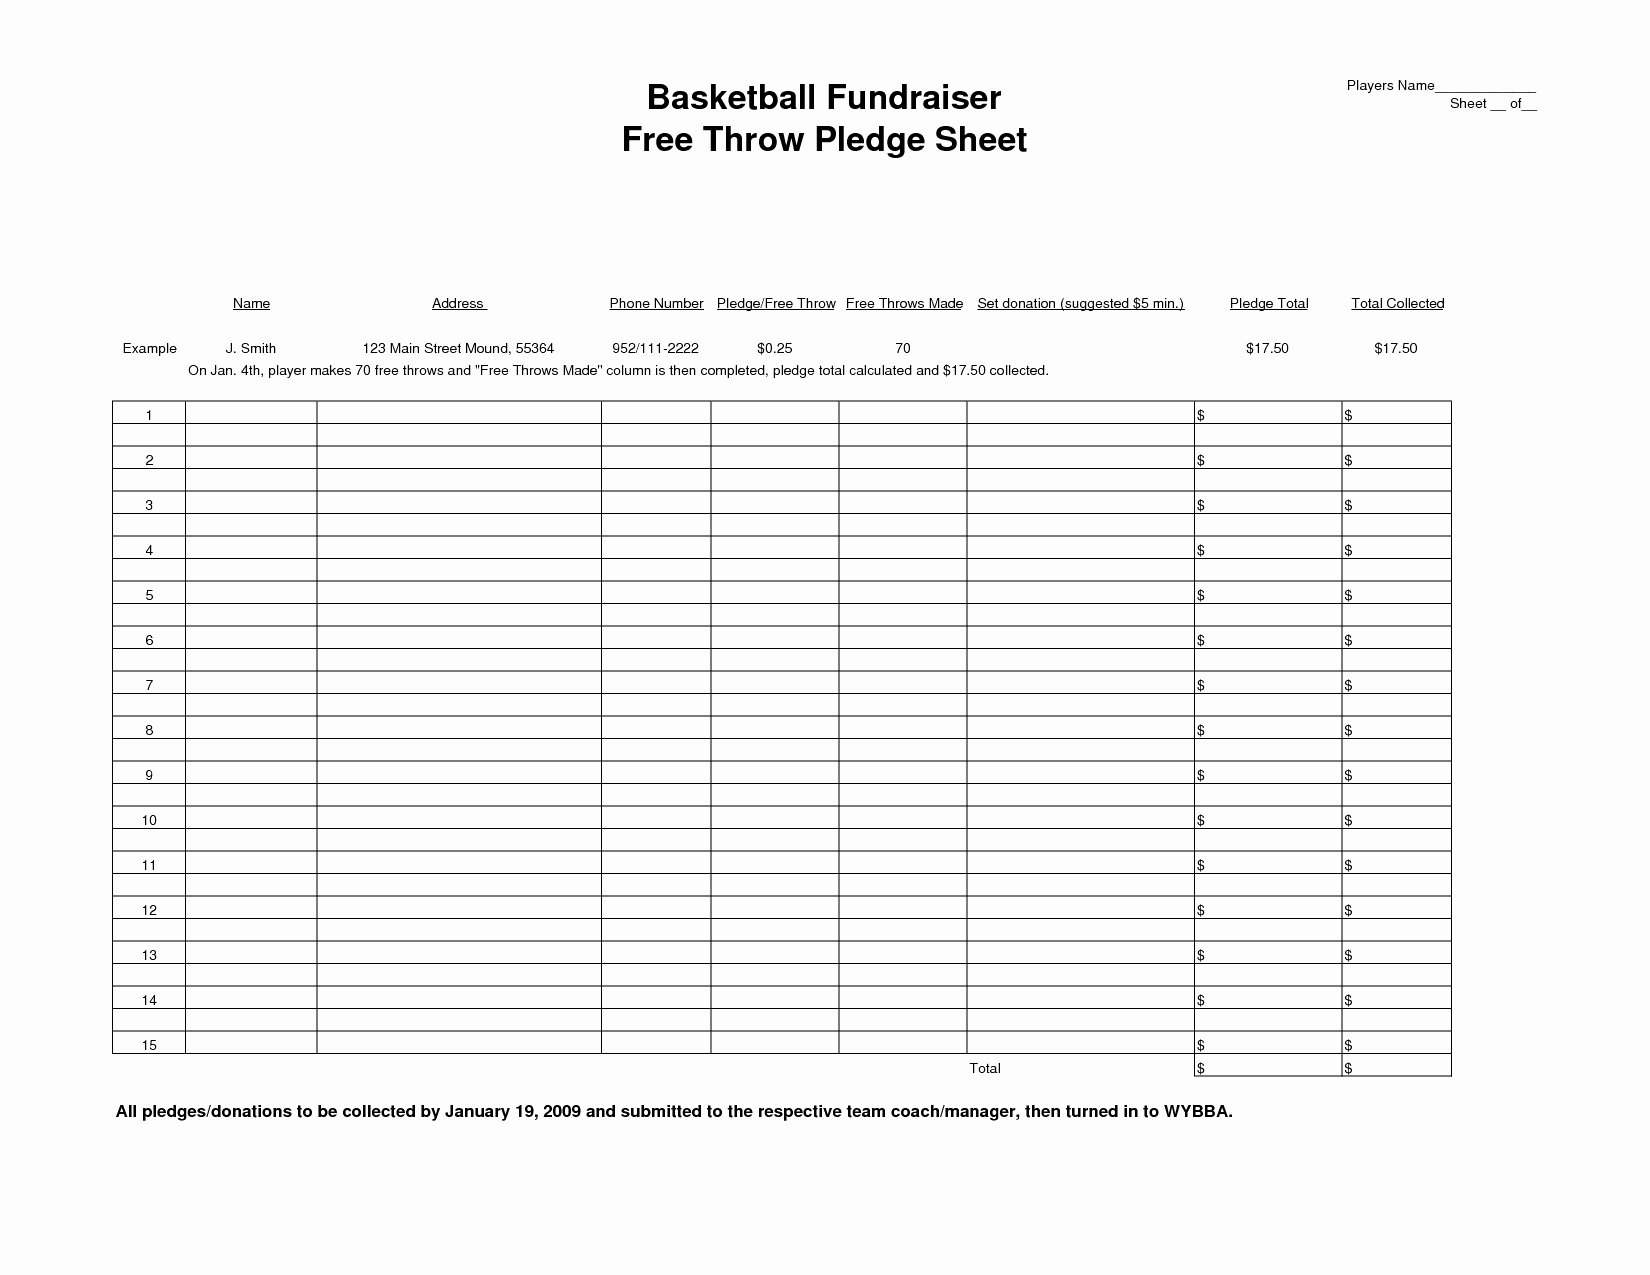 Fundraiser form Template Free New Fundraiser form Template Free – Versatolelive